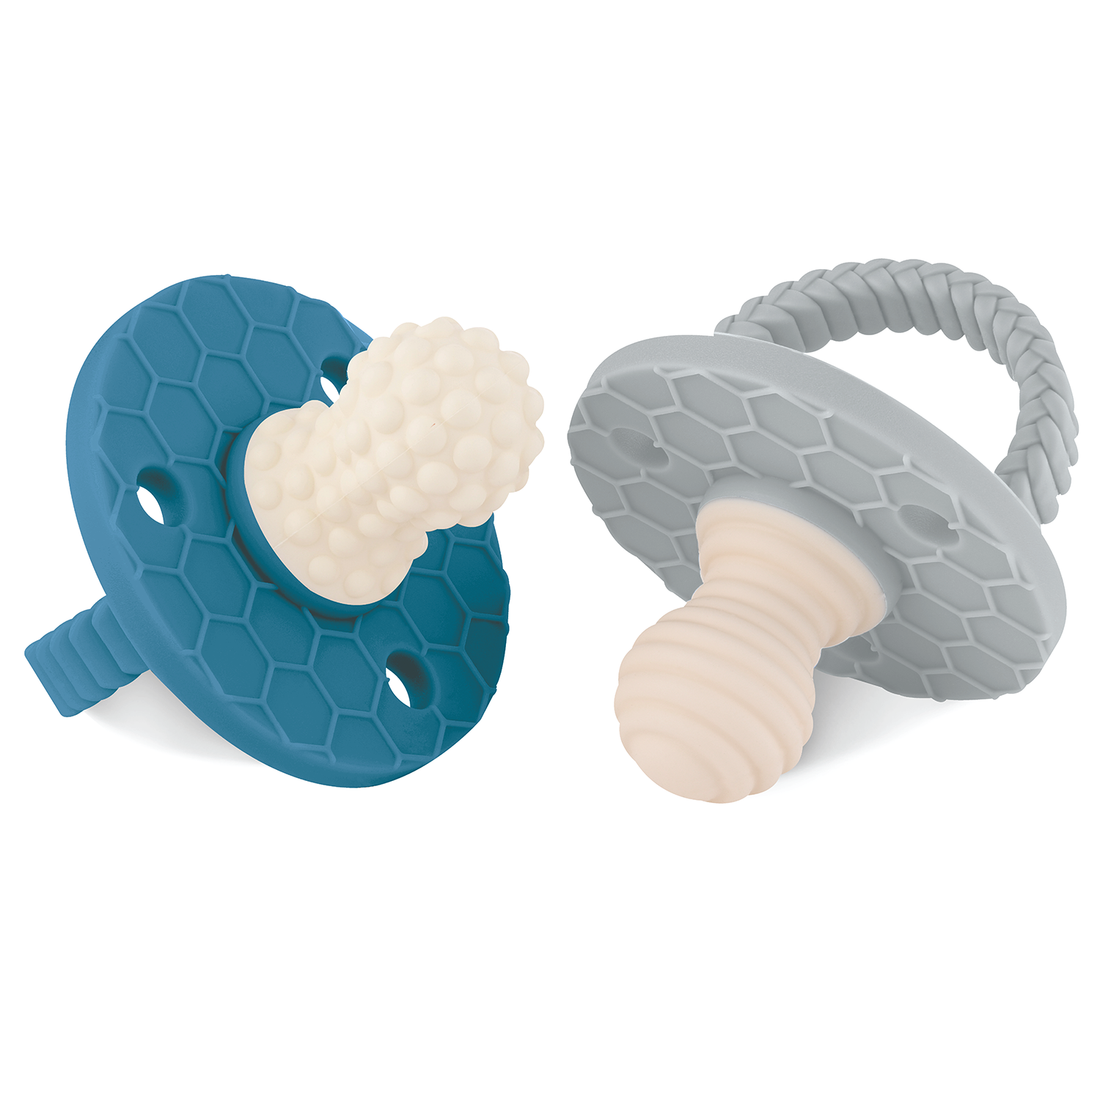 SoothiPop Silicone Teething Pacifier Round Shaped (2 Pack) - Glacial Blue and French Gray